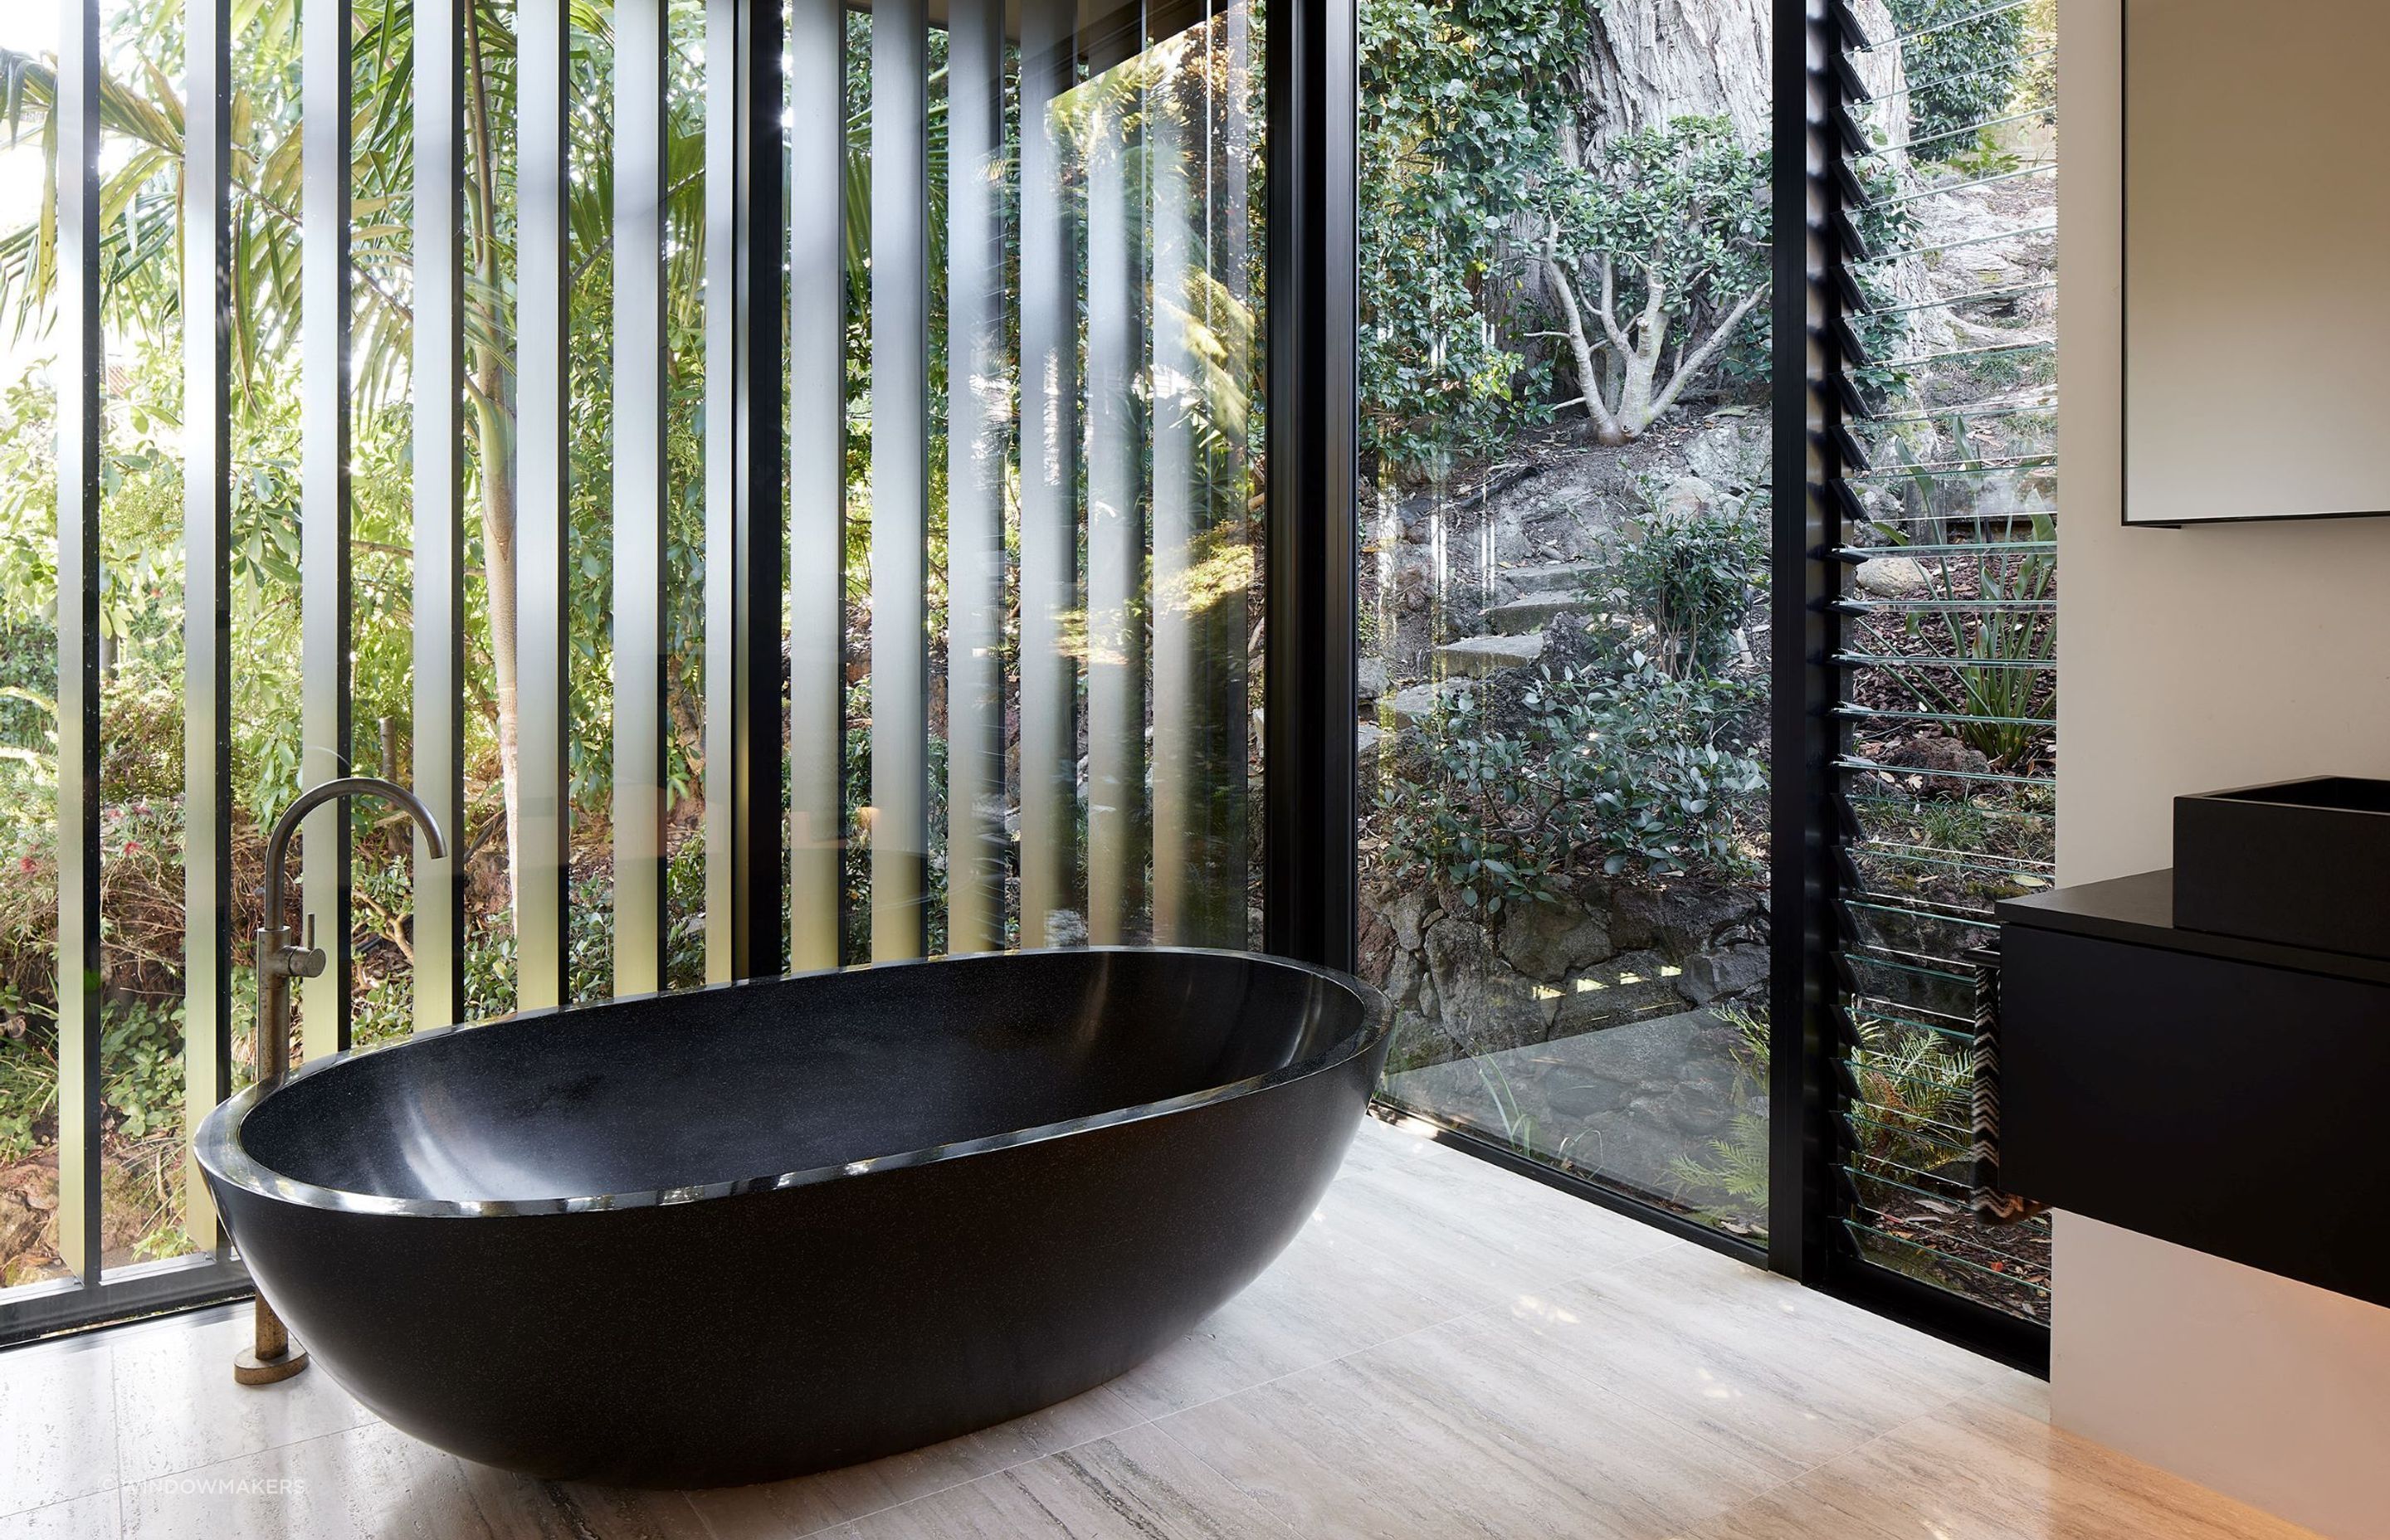 Glass panelling around the statement freestanding tub fully immerses one into the natural surroundings of this Herne Bay home.